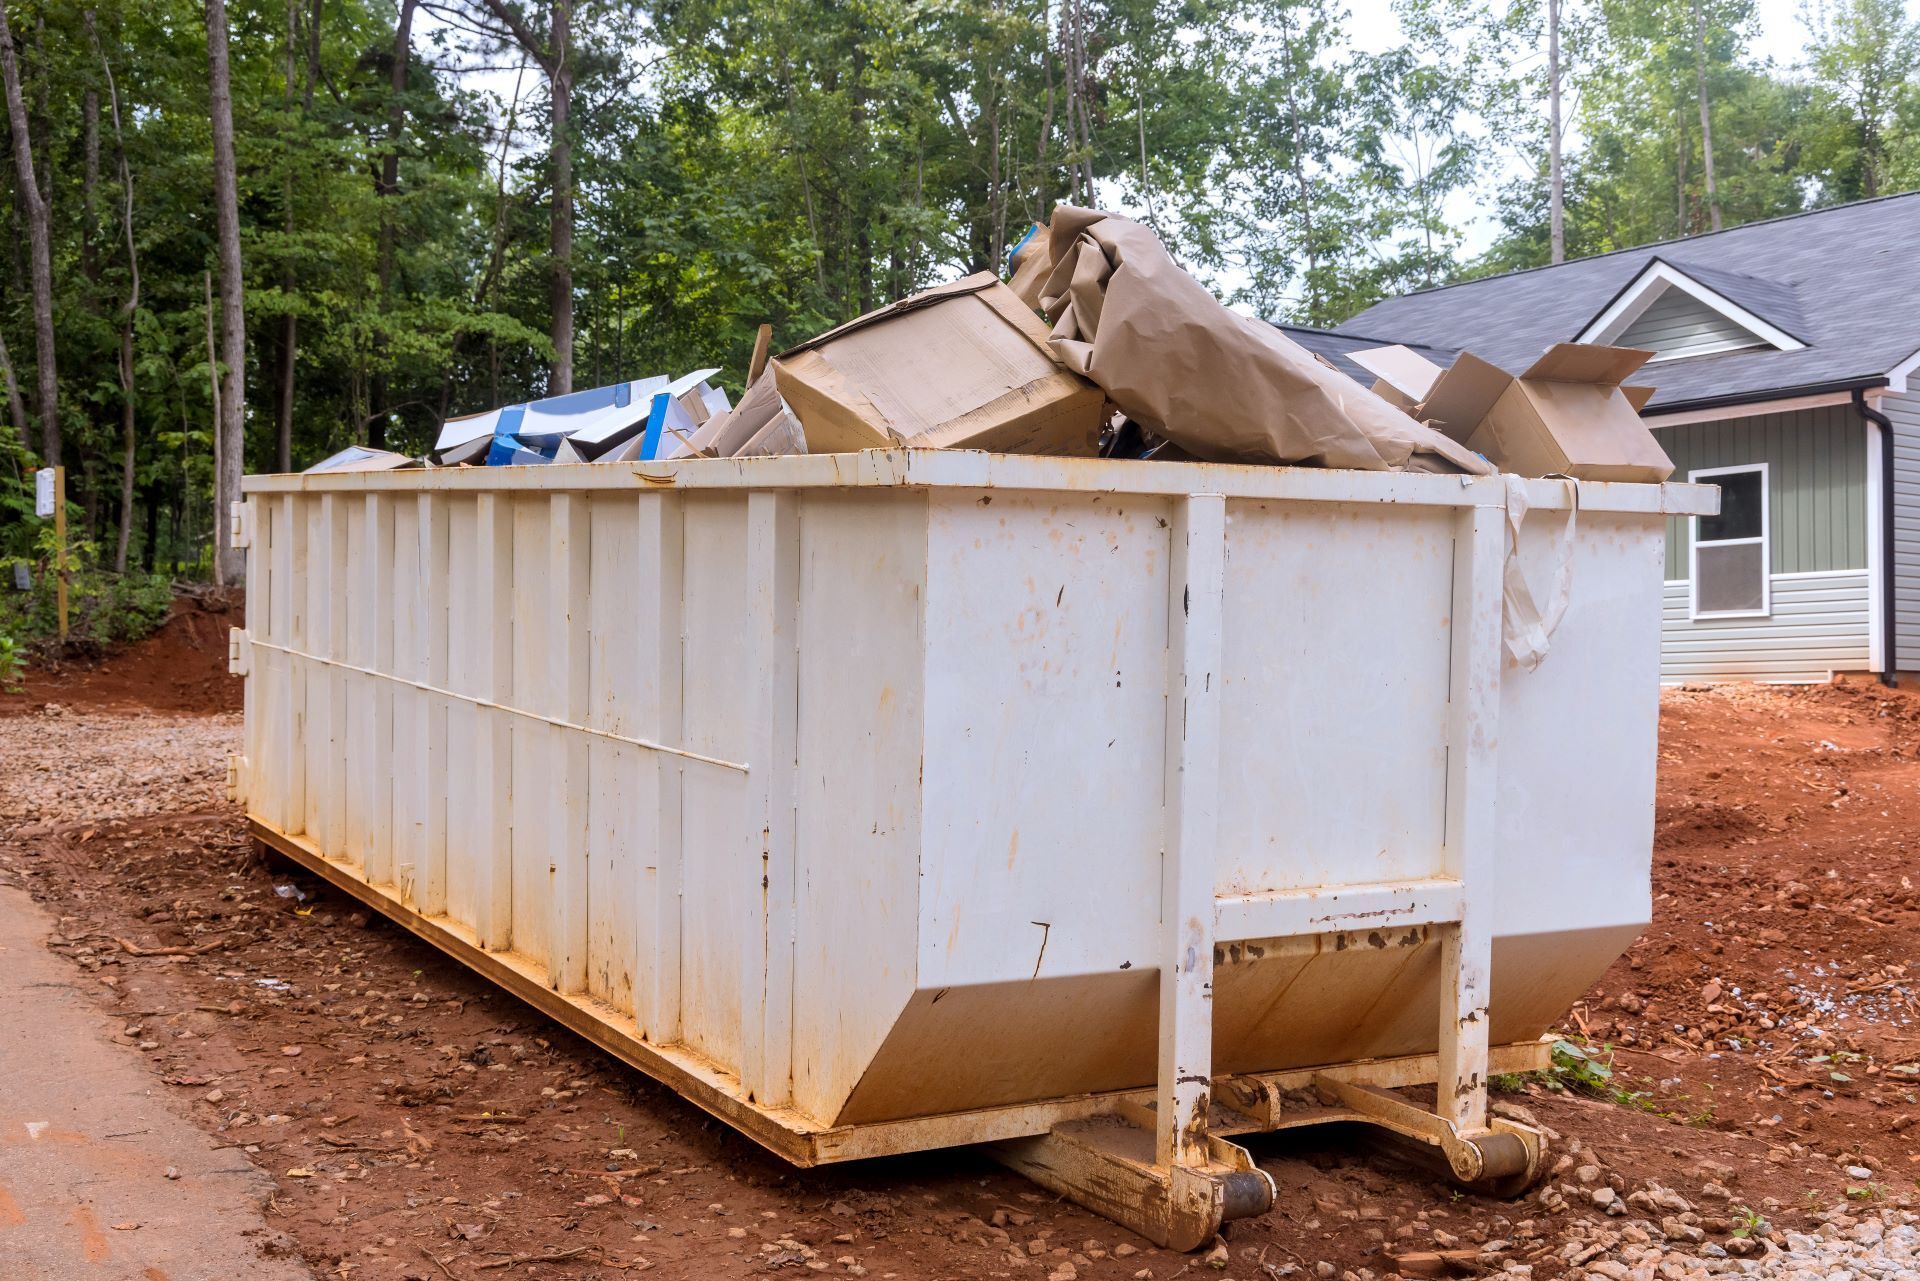 A large white dumpster filled with cardboard boxes is sitting in front of a house under construction.